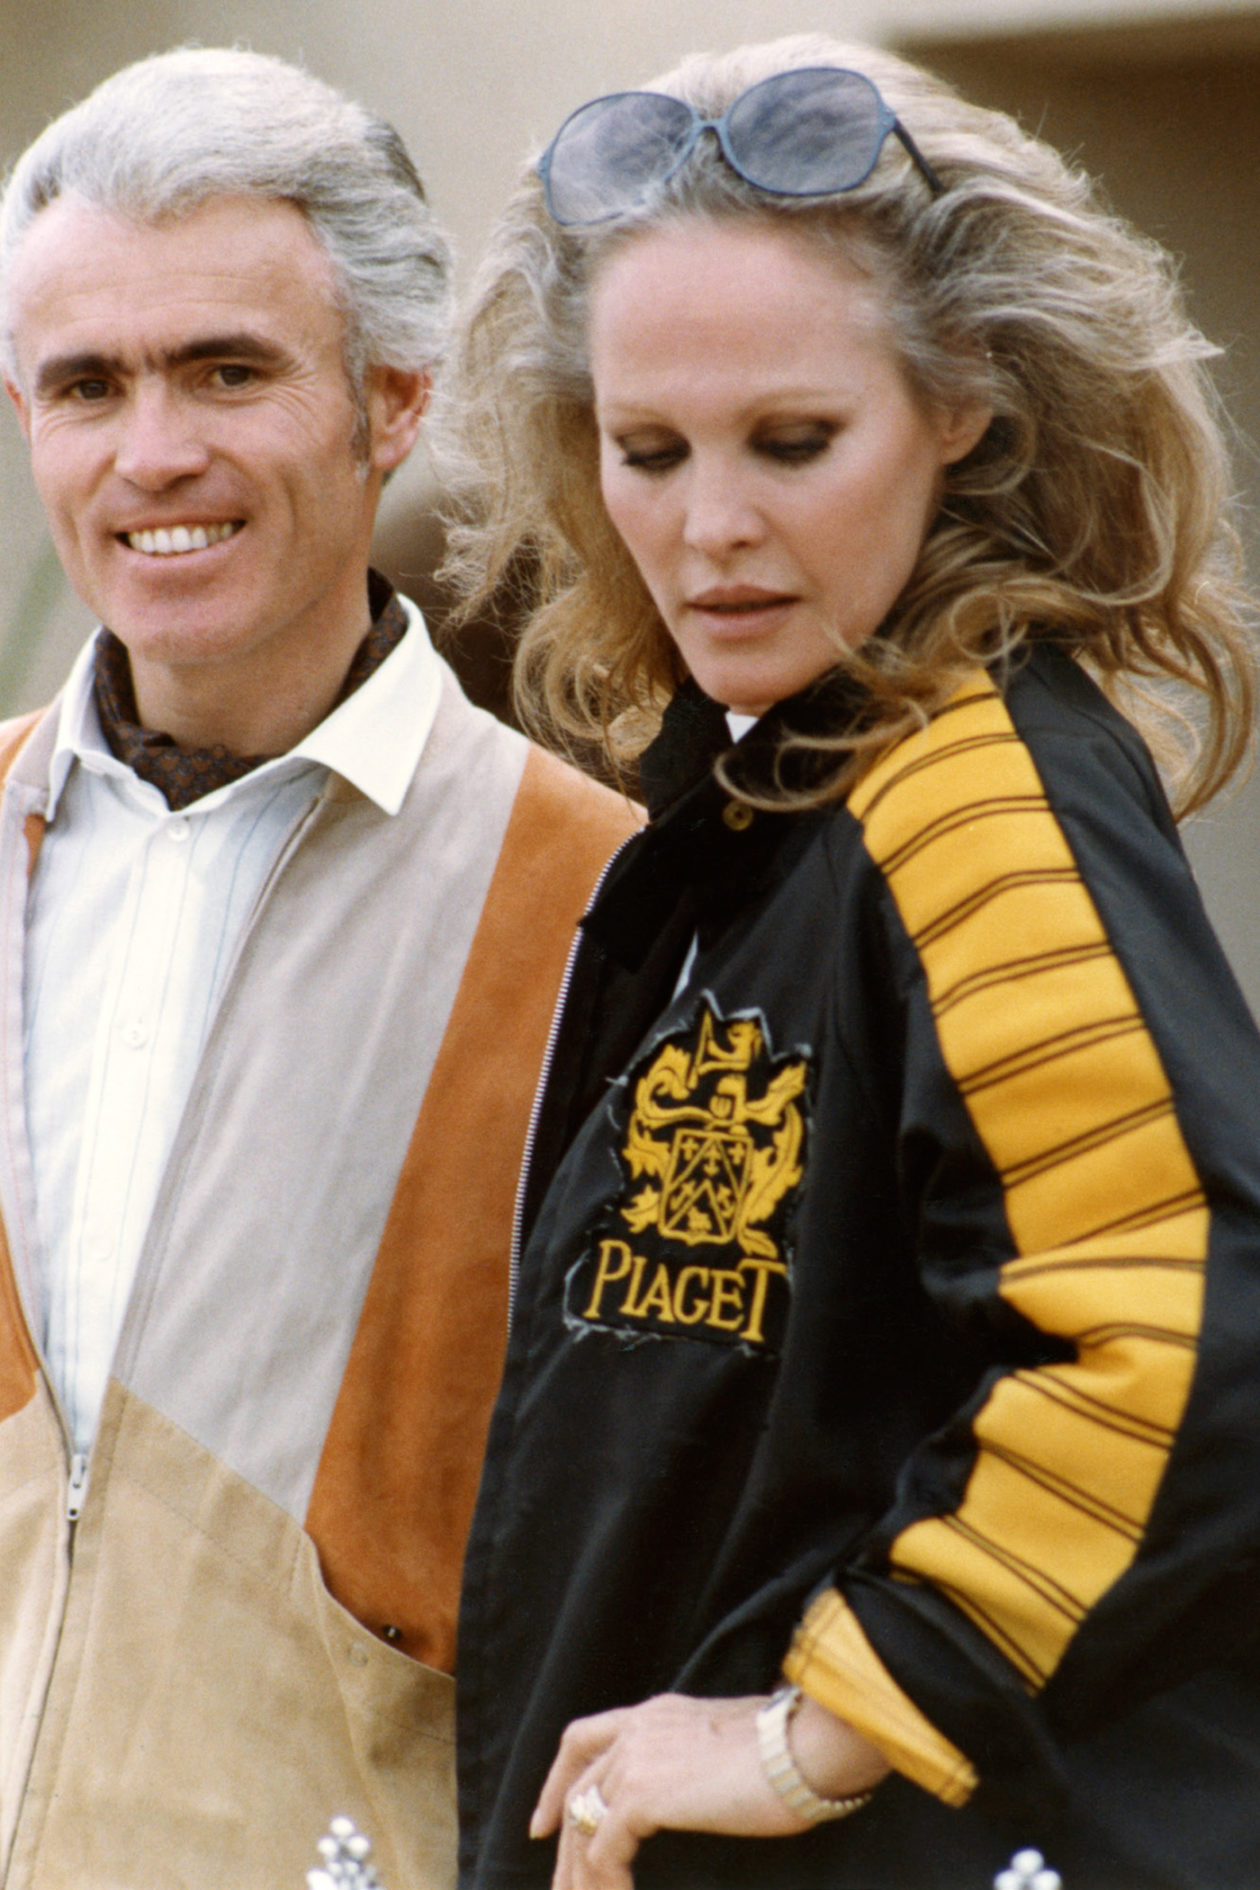 Yves Piaget i Ursula Andress
podczas Piaget Polo Competition - 1979